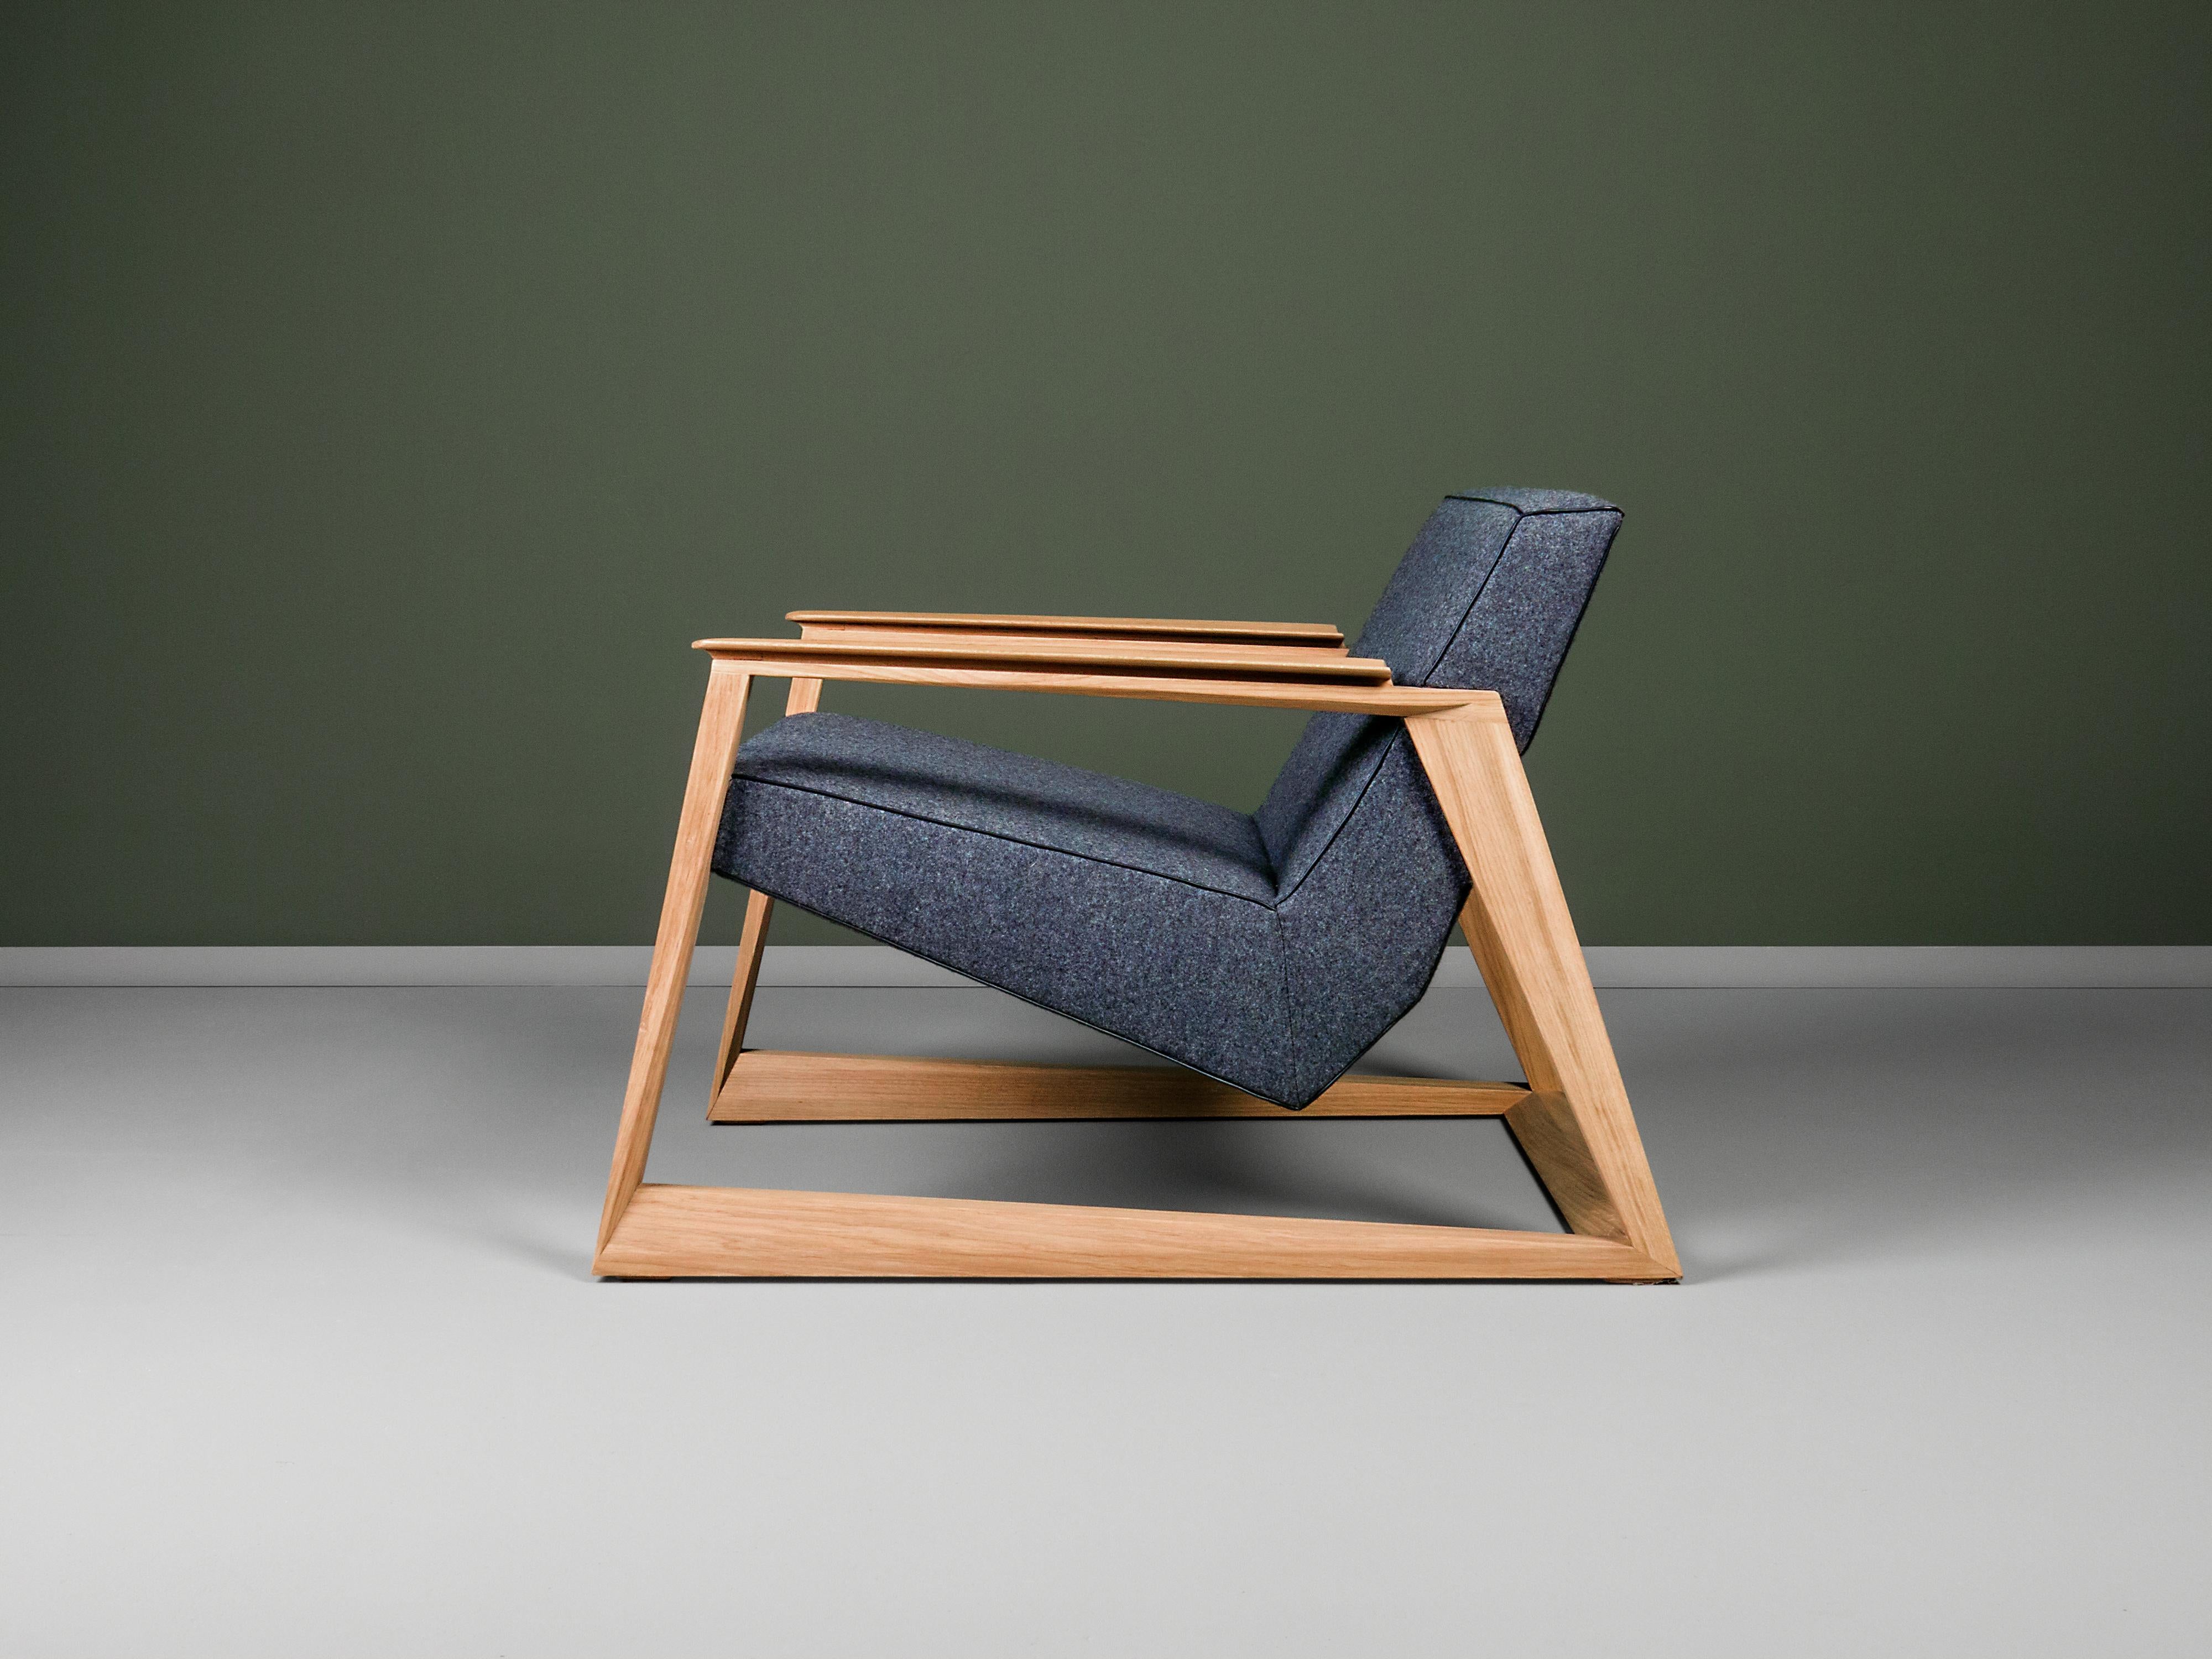 Inspired by the characteristic V position and the shape of the armrest which consists of two parts separated by the joint edge, which associates with the swallow’s tail, this armchair was named Lasta (‘lasta’ is a swallow in Serbian)
Since swallow